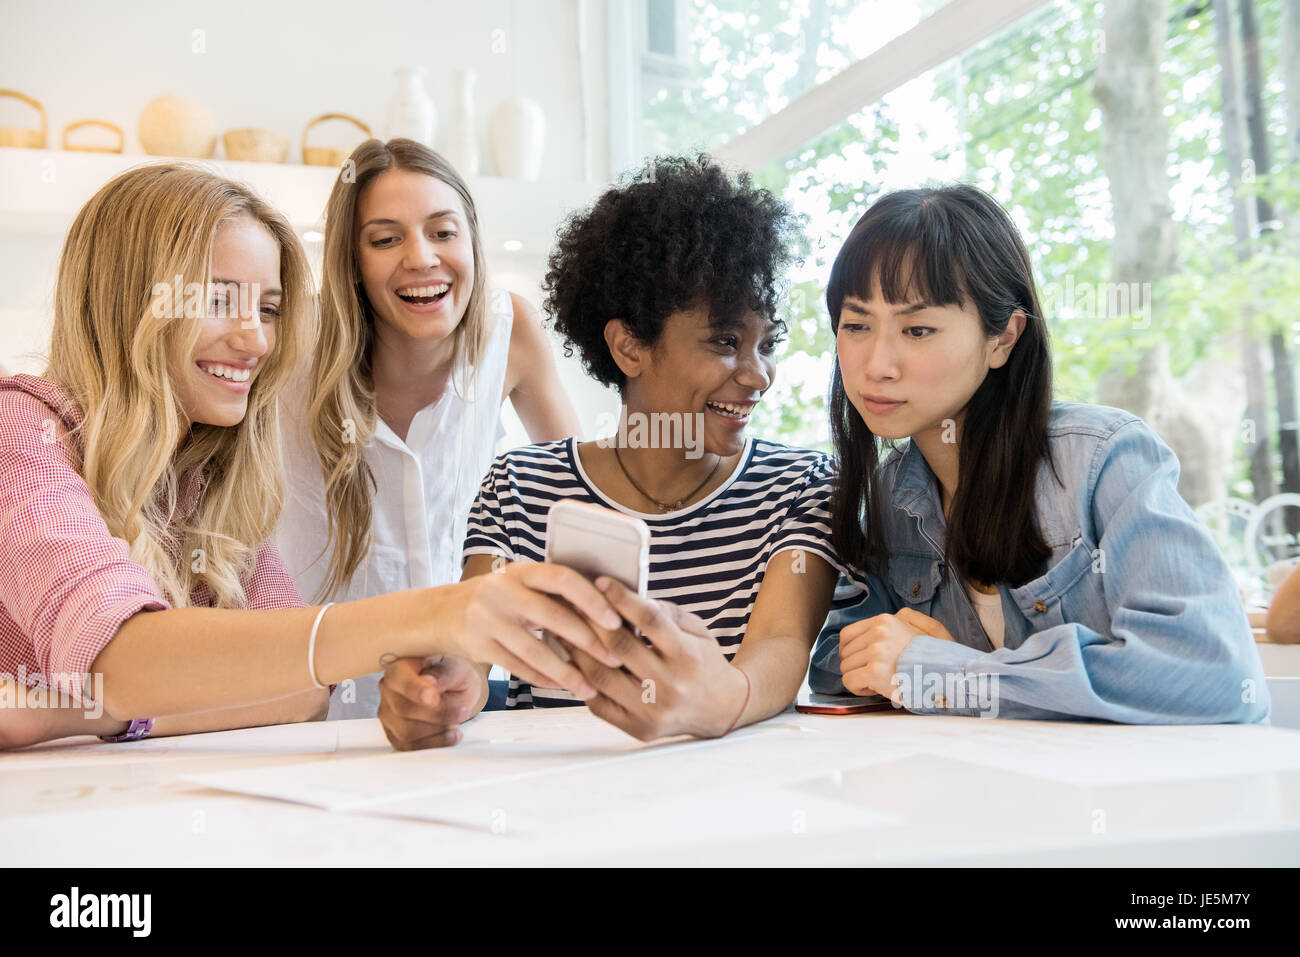 Young women laughing at multimedia smartphone in cafe Stock Photo